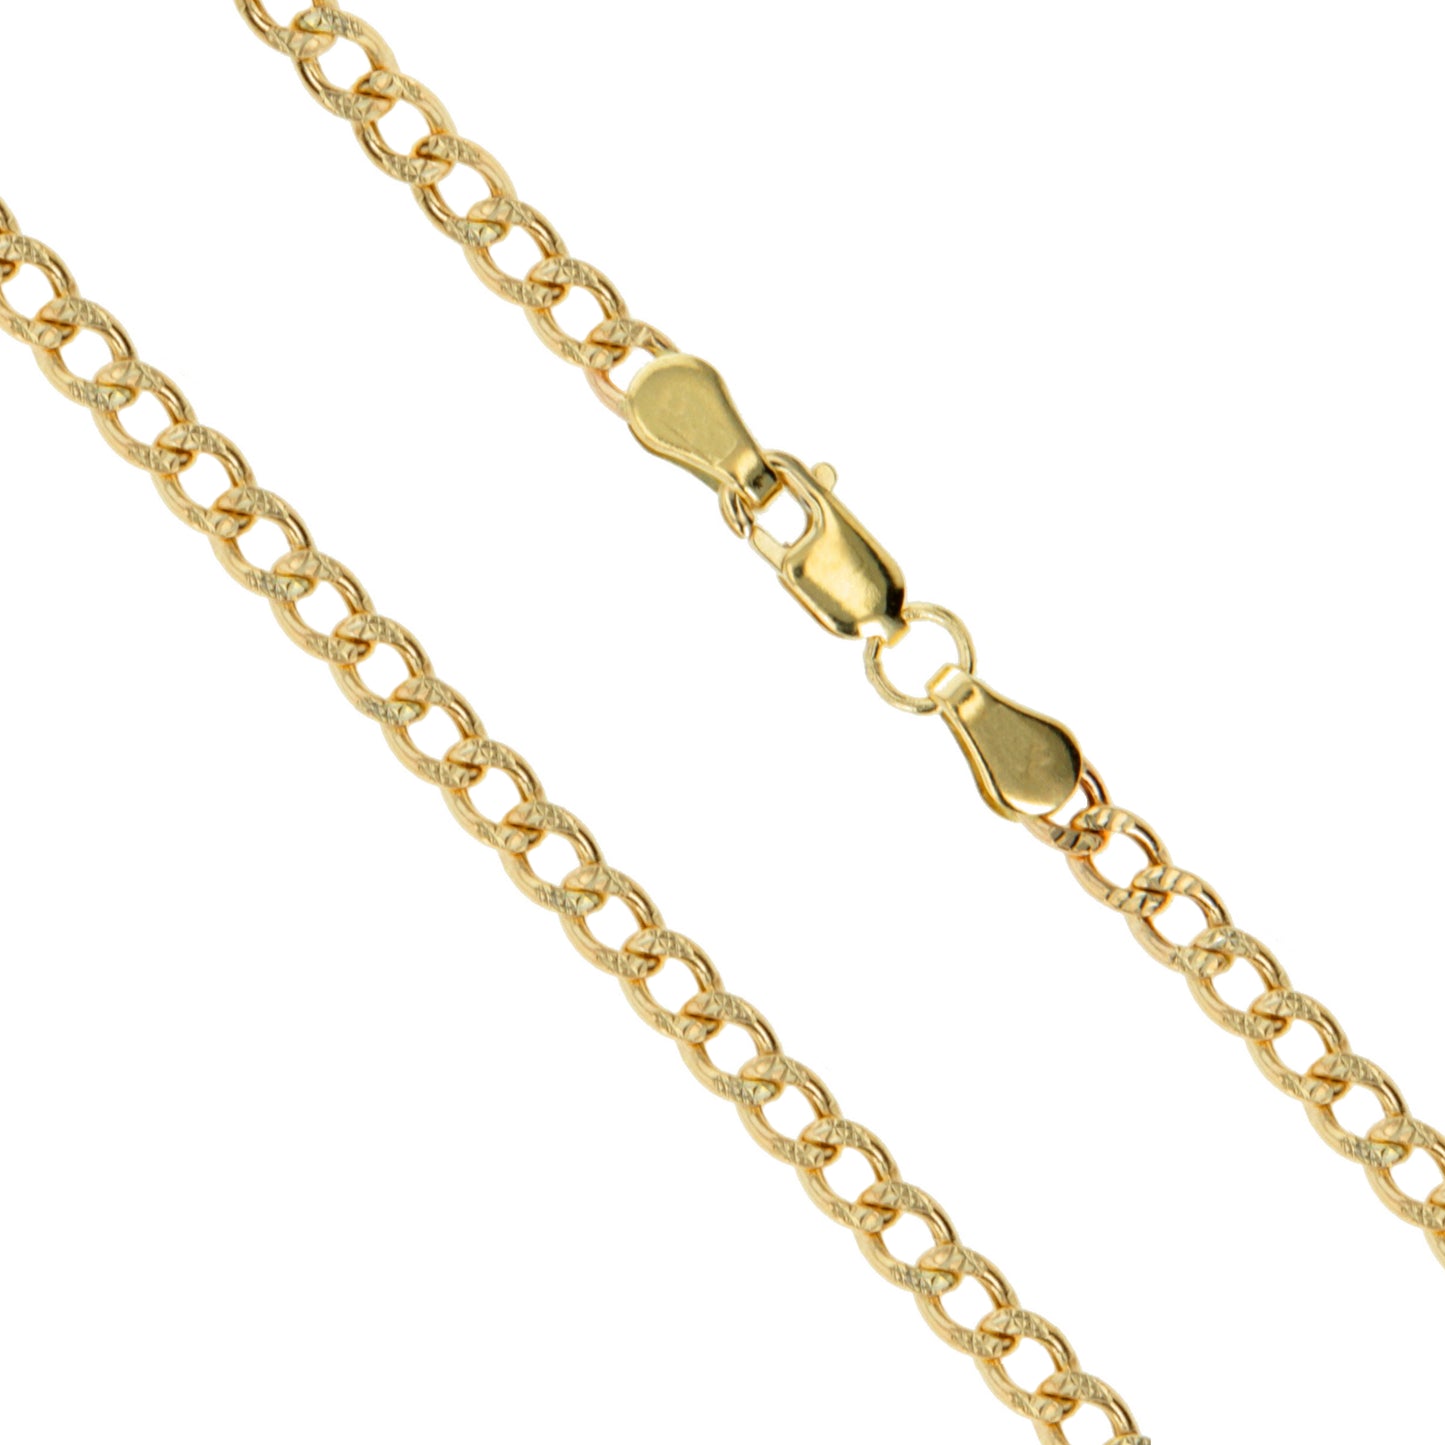 10k Yellow Gold-Hollow Pave Curb Link Chain 2mm Necklace – Sac Silver